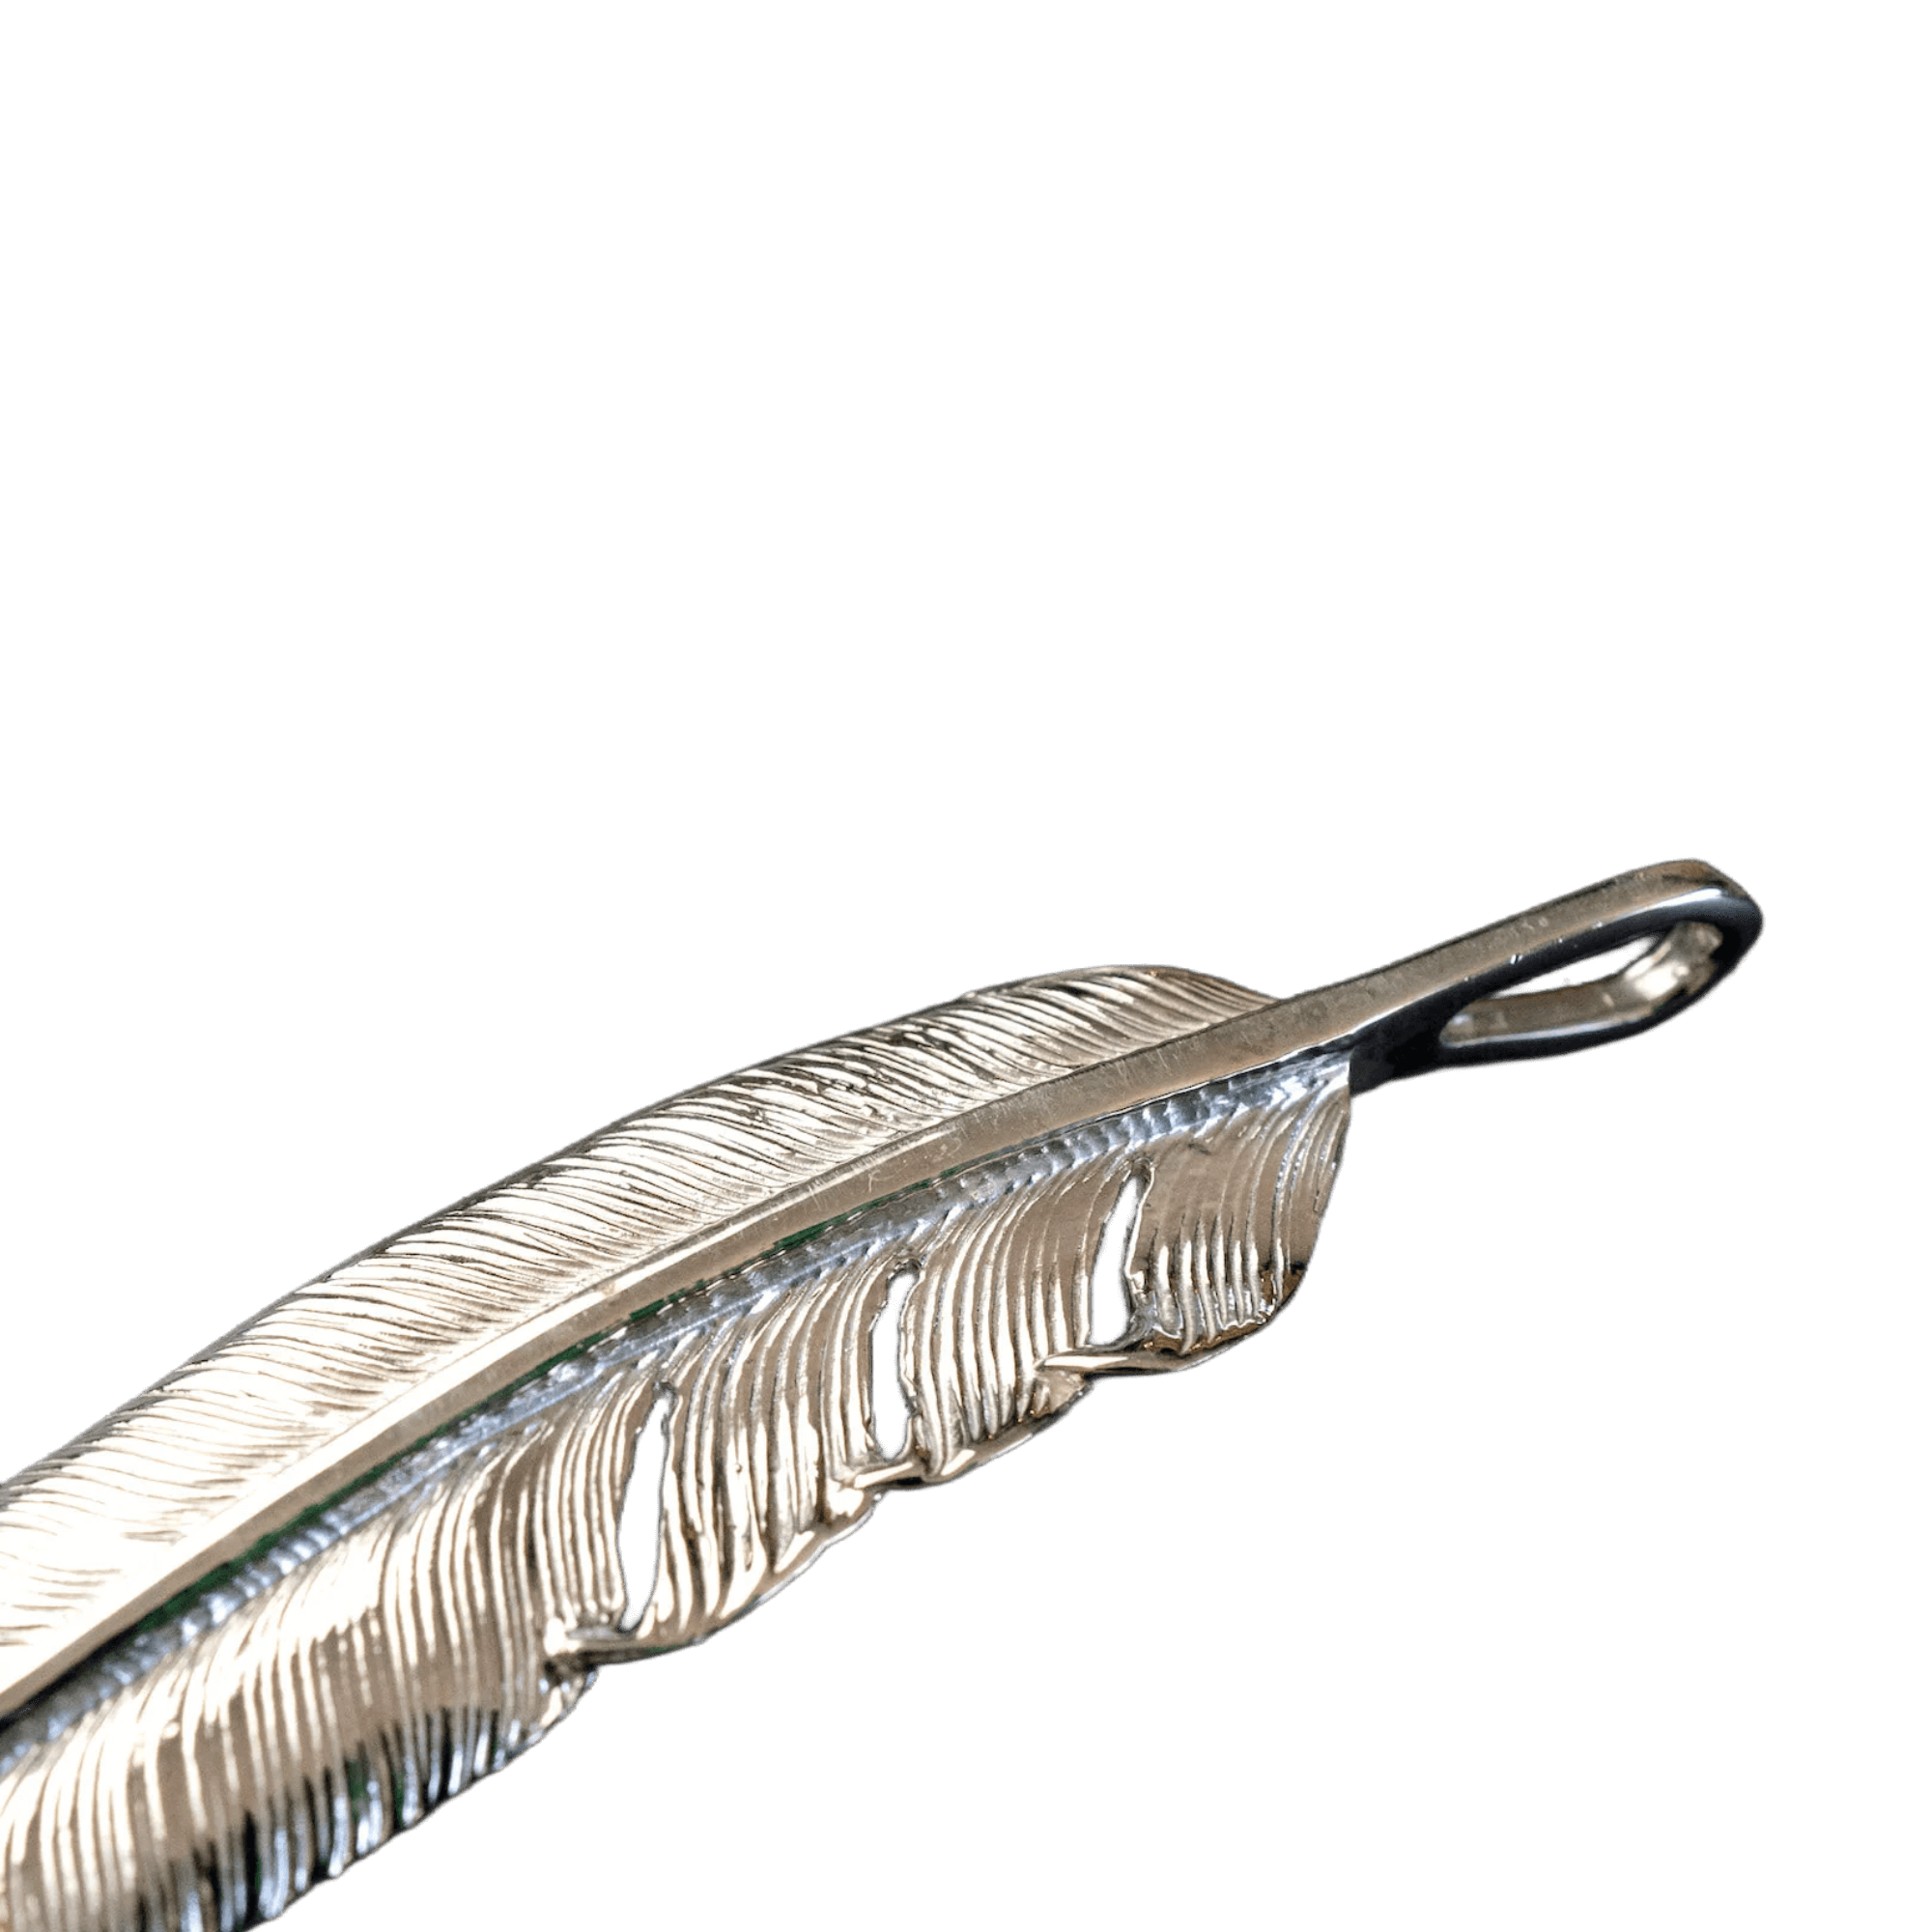 First Arrow&#39;s Large Quarter 18k Gold Feather Pendant